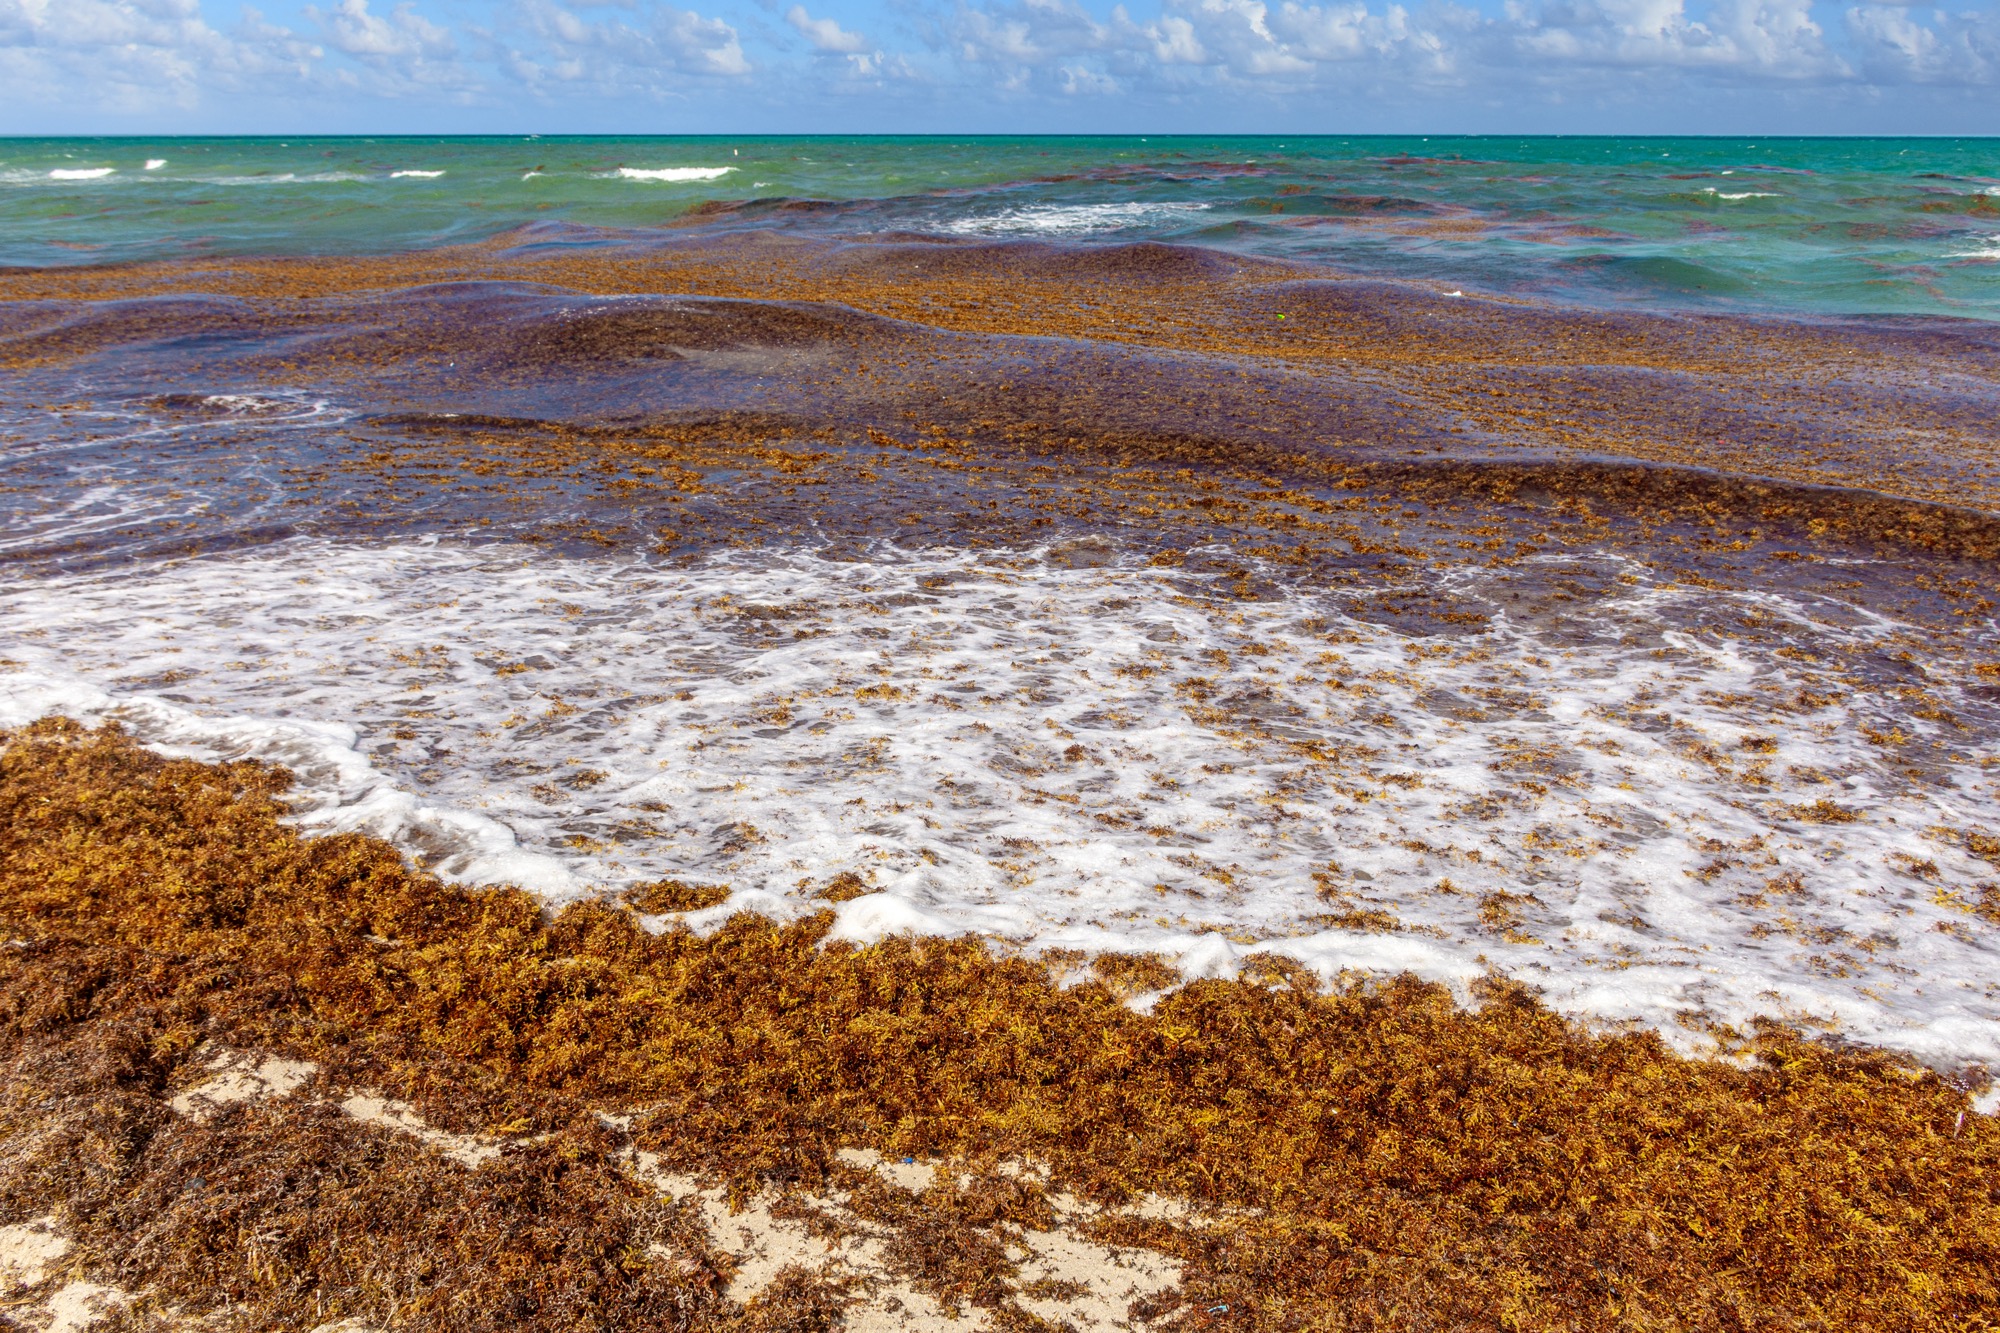 Masses of sargassum seaweed washing up onto a beach, the result of climate change and ocean plants growing uncontrollably